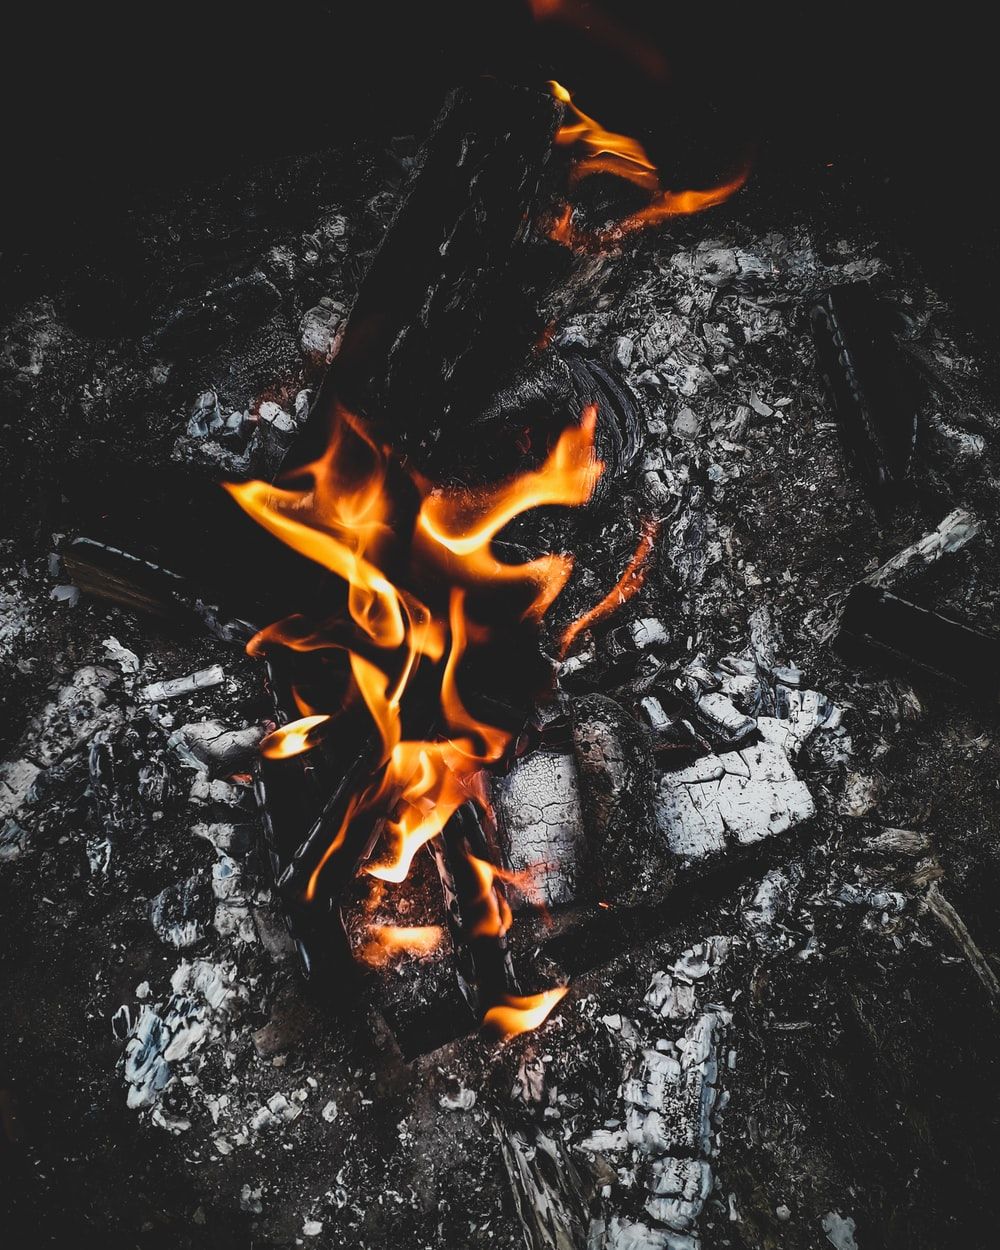 Burning Wood Picture. Download Free Image